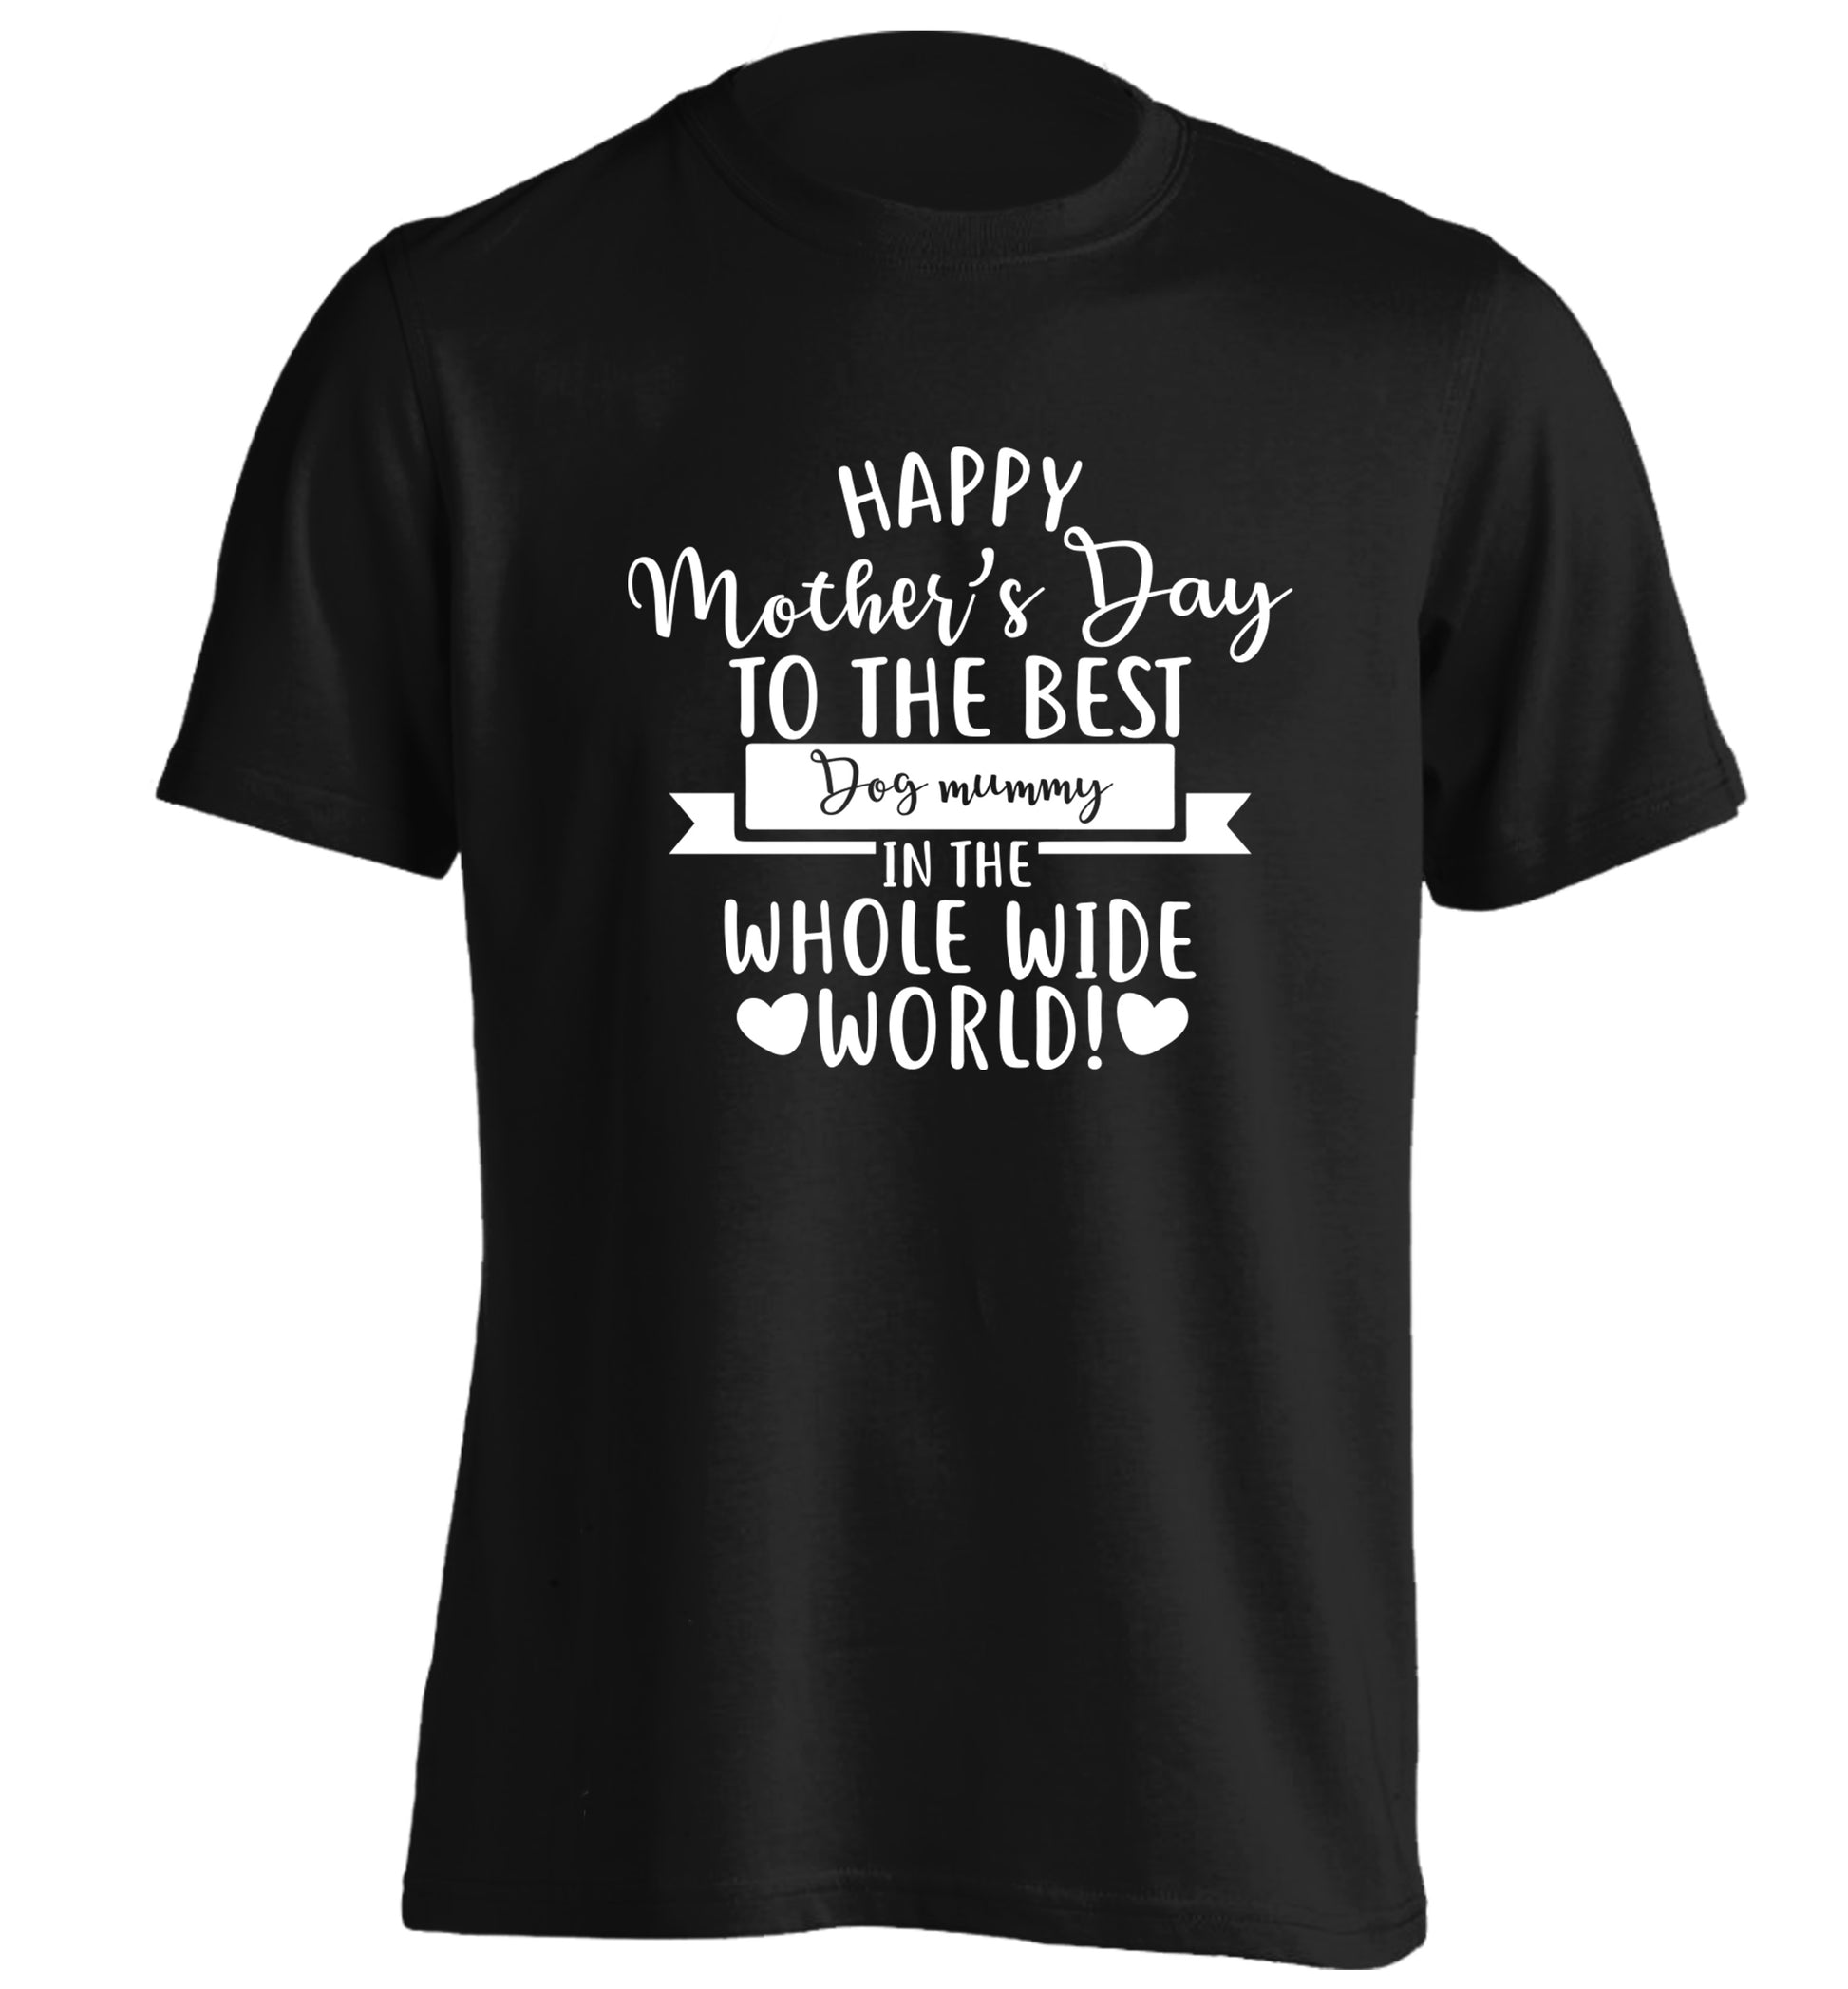 Happy mother's day to the best dog mummy in the world adults unisex black Tshirt 2XL